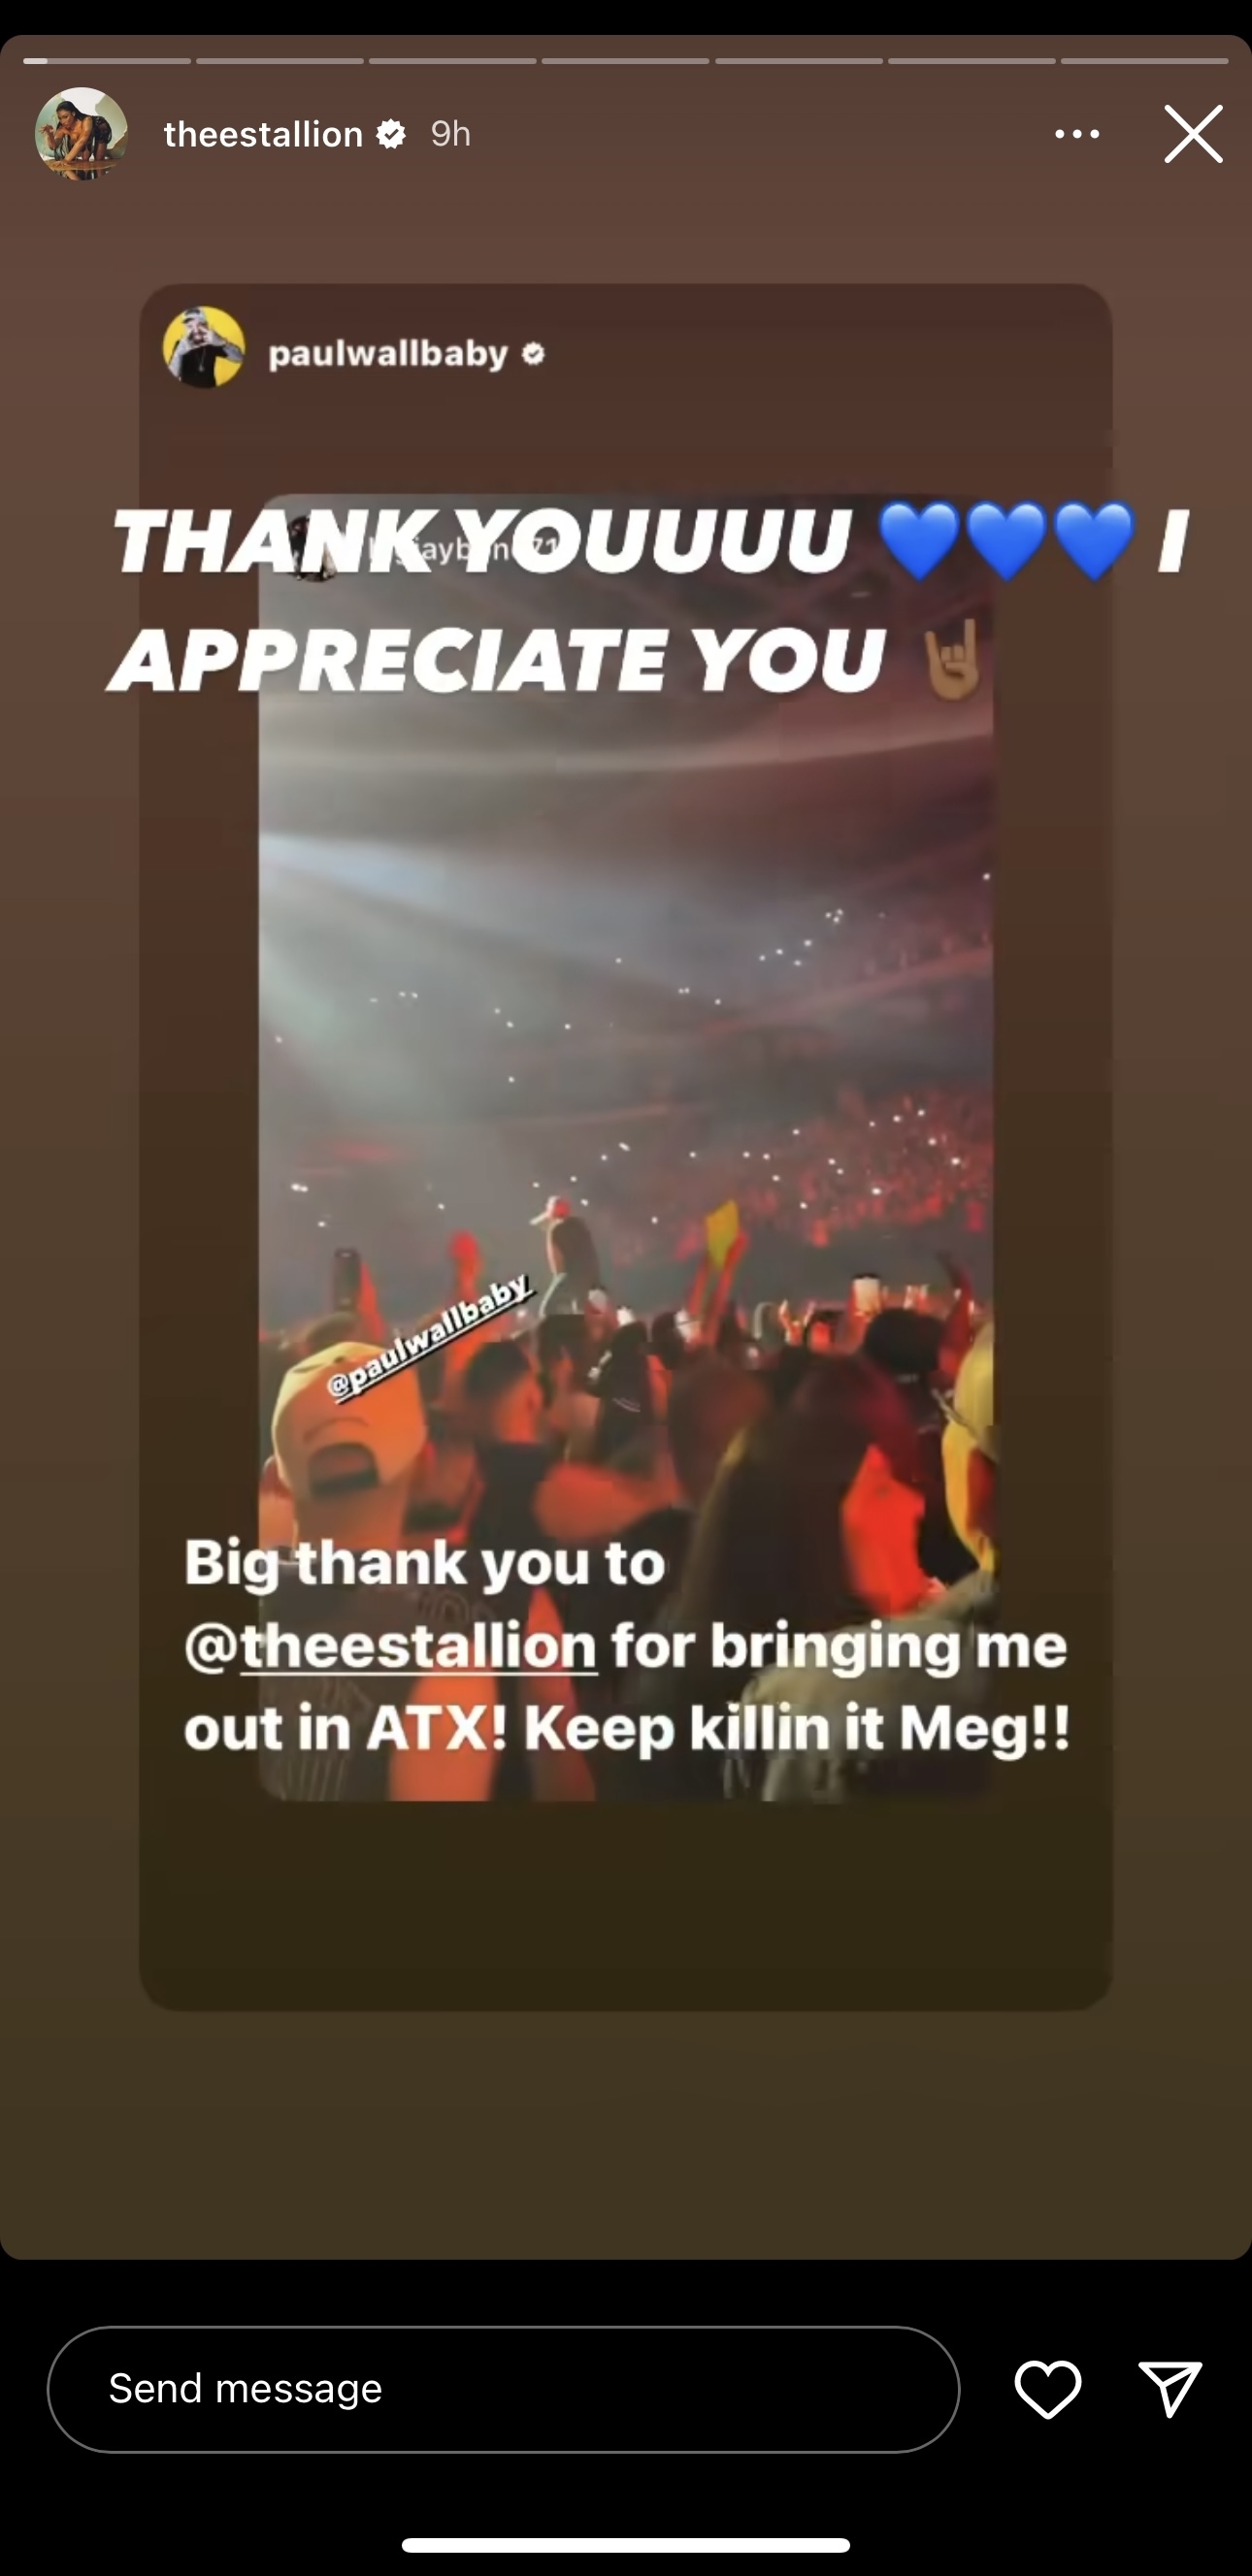 Instagram story by @theestallion reposting @paulwallbaby thanking Meg for bringing him out in ATX; text reads &quot;THANK YOUUUU I APPRECIATE YOU&quot;